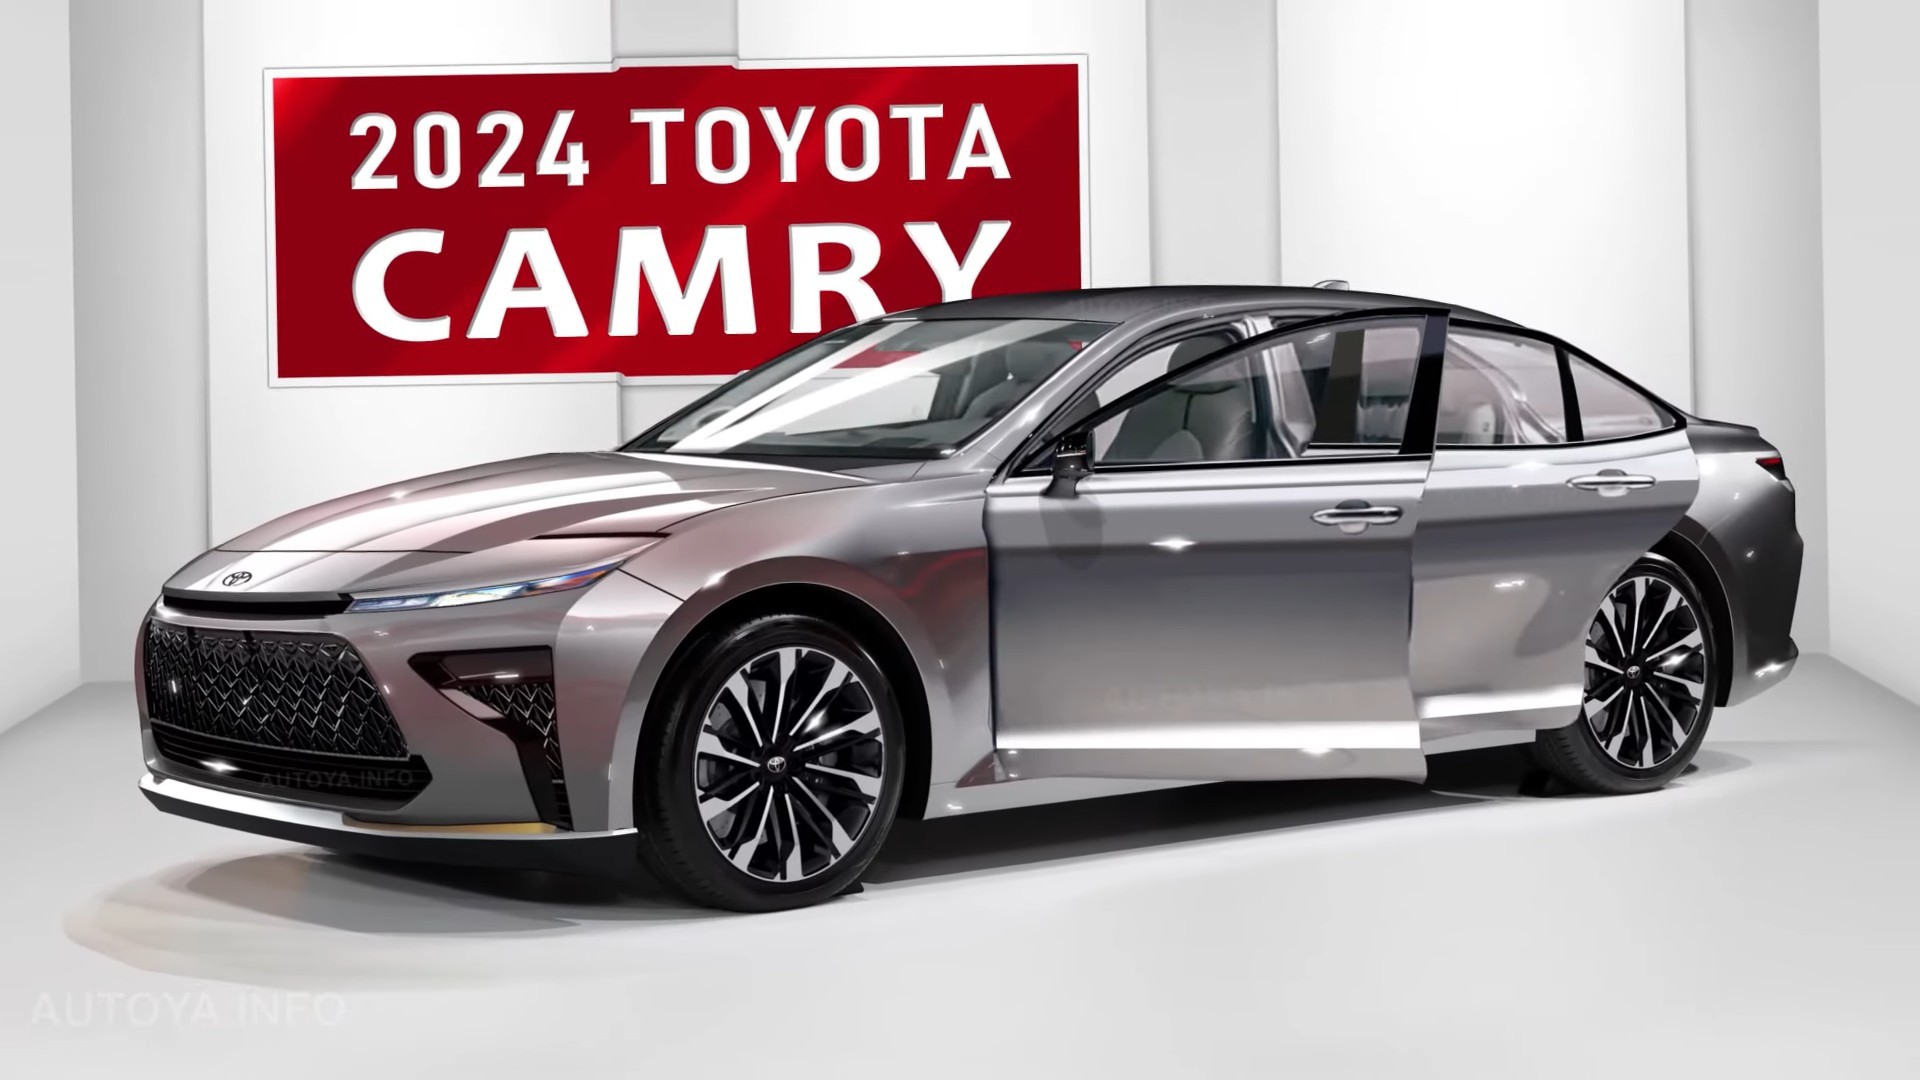 2024 Toyota Camry IX Informally Presents All the Colorful New